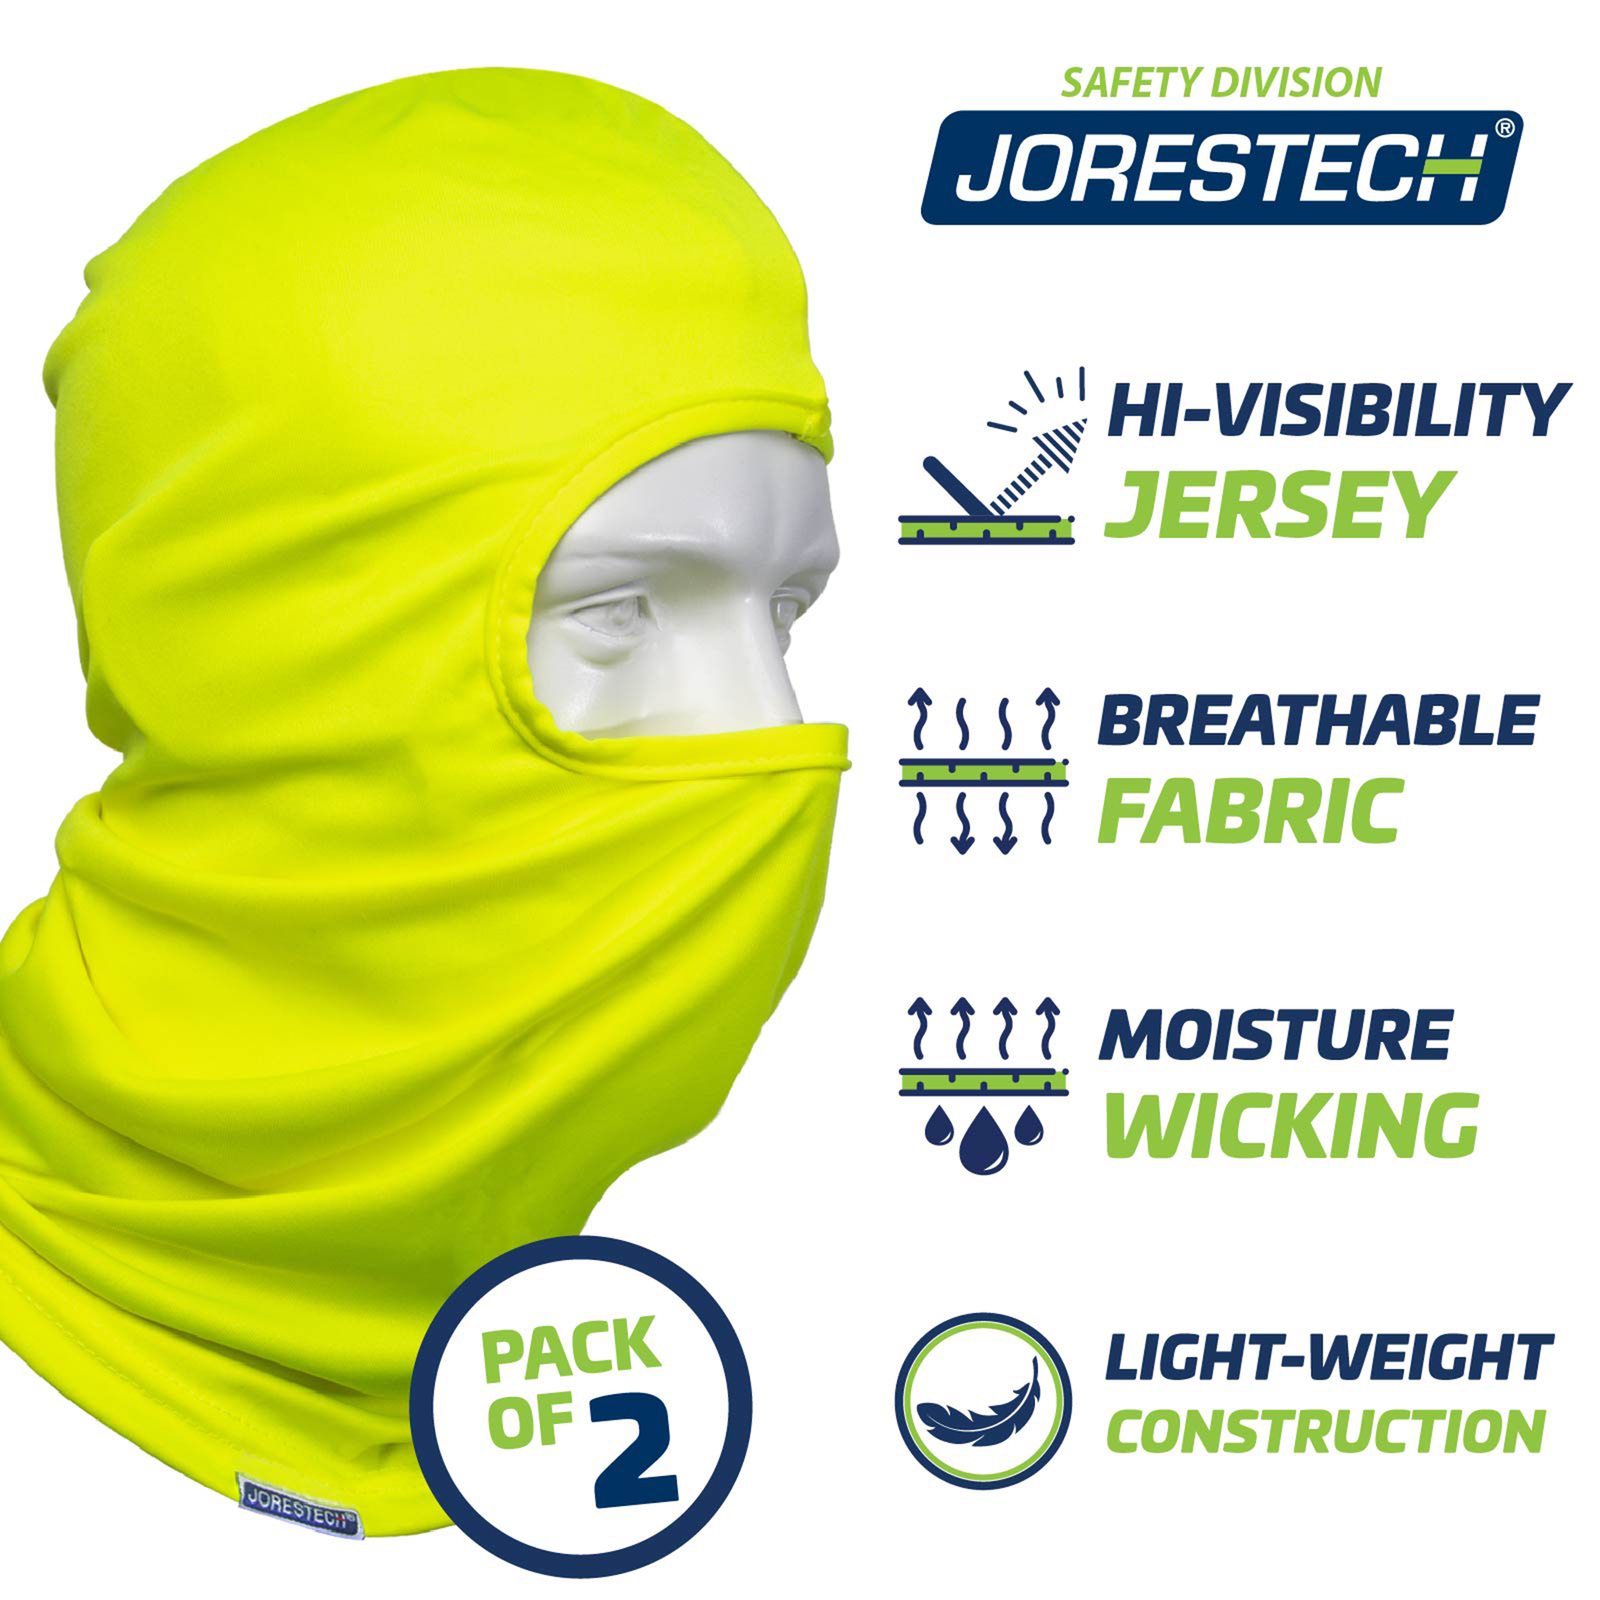 Image shows a hi-vis JORESTECH balaclava mask and a round circle that reads: pack of 2. Plus 4 icons that mention: Hi Visibility Jersey, Breathable fabric, Moisture wicking, Light weight construction.